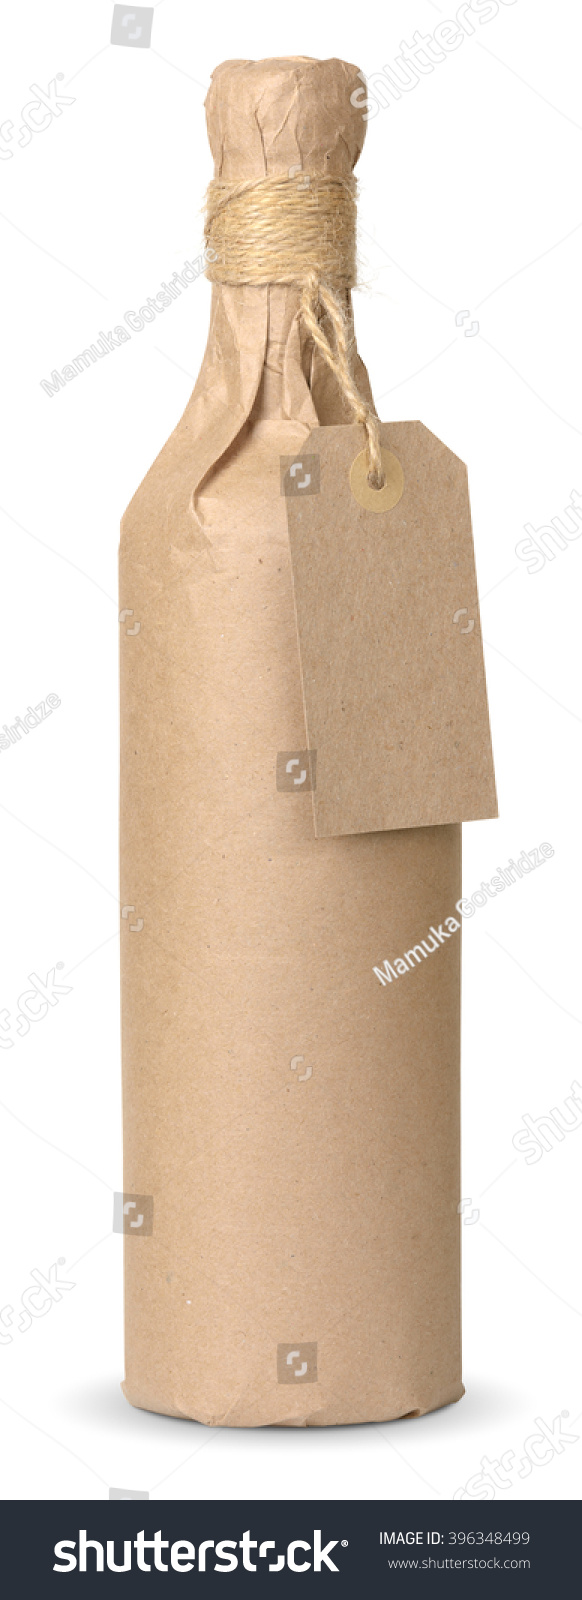 Download Bottle Wine Wrapped Kraft Paper Price Stock Photo Edit Now 396348499 Yellowimages Mockups